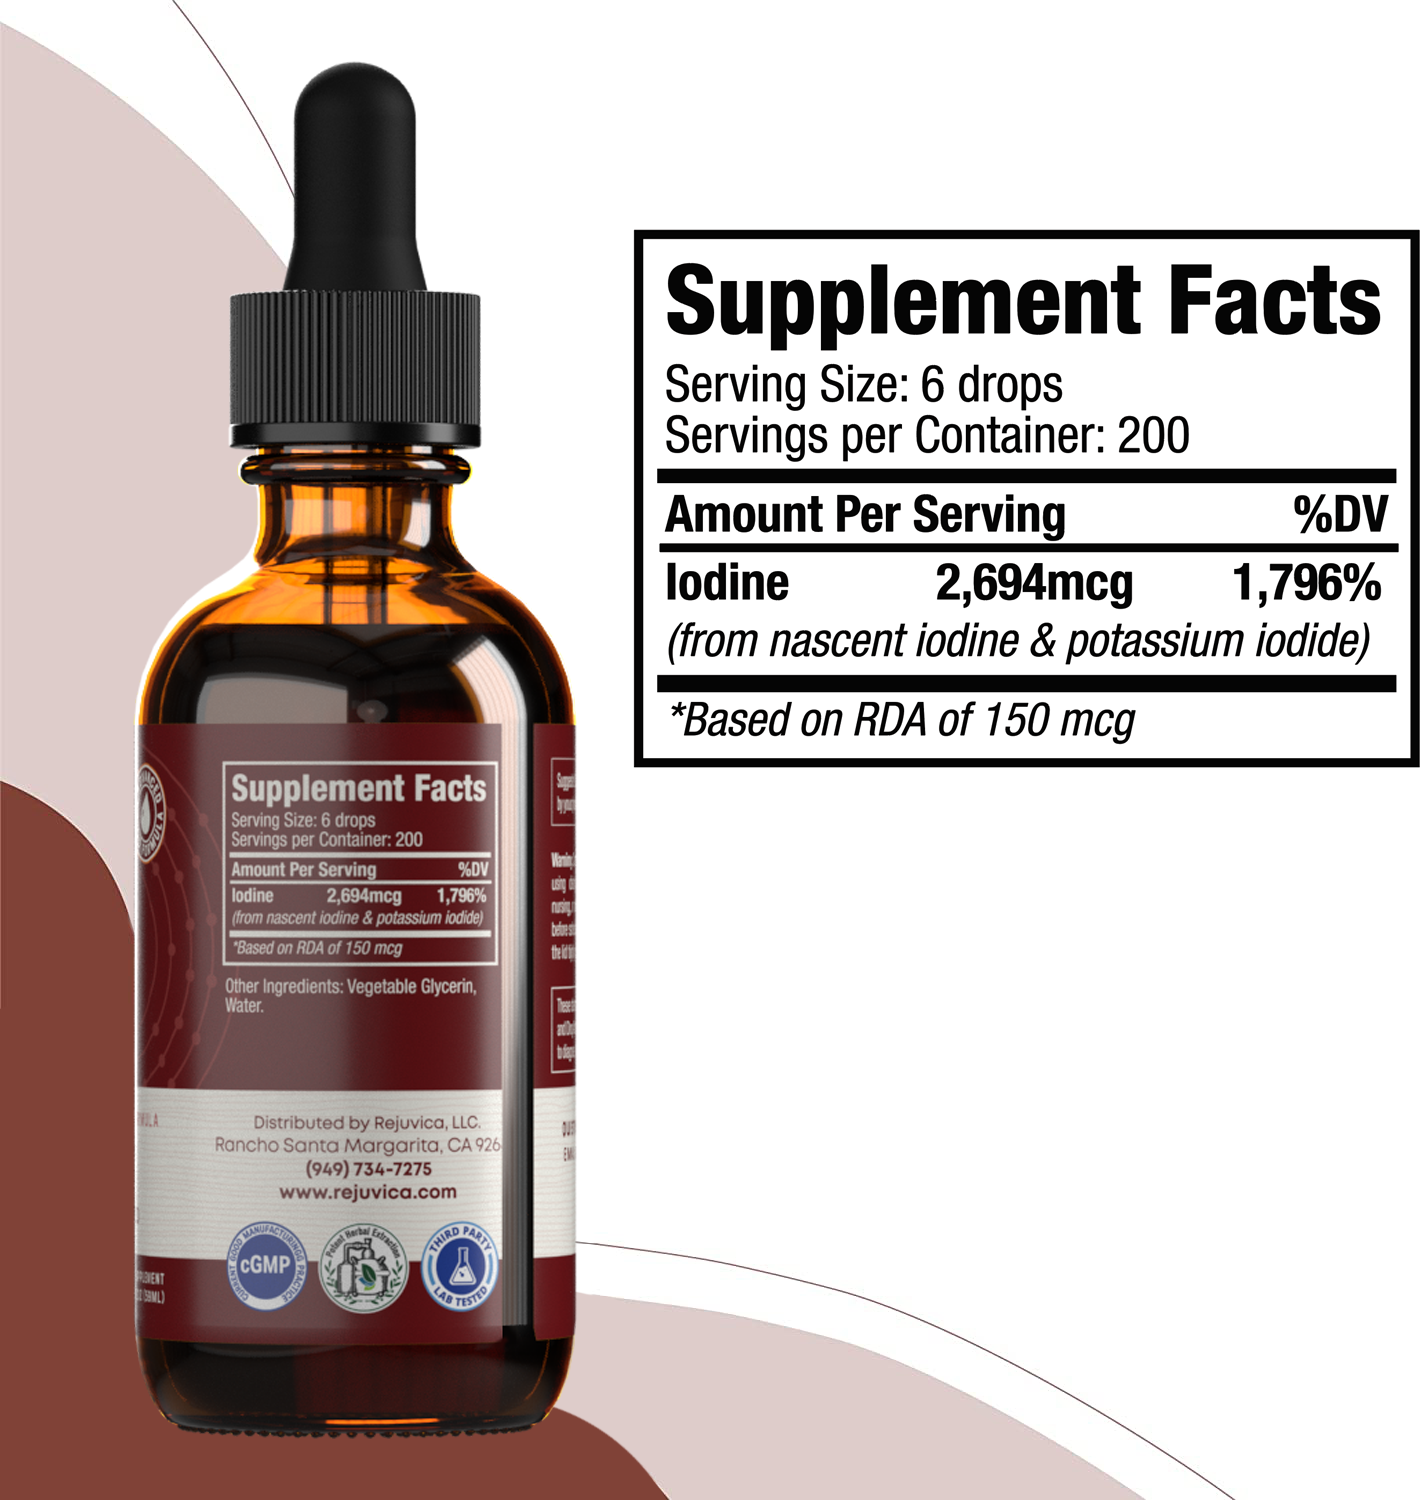 Active Iodine - Nascent Iodine Drops -  Liquid Delivery for Better Absorption